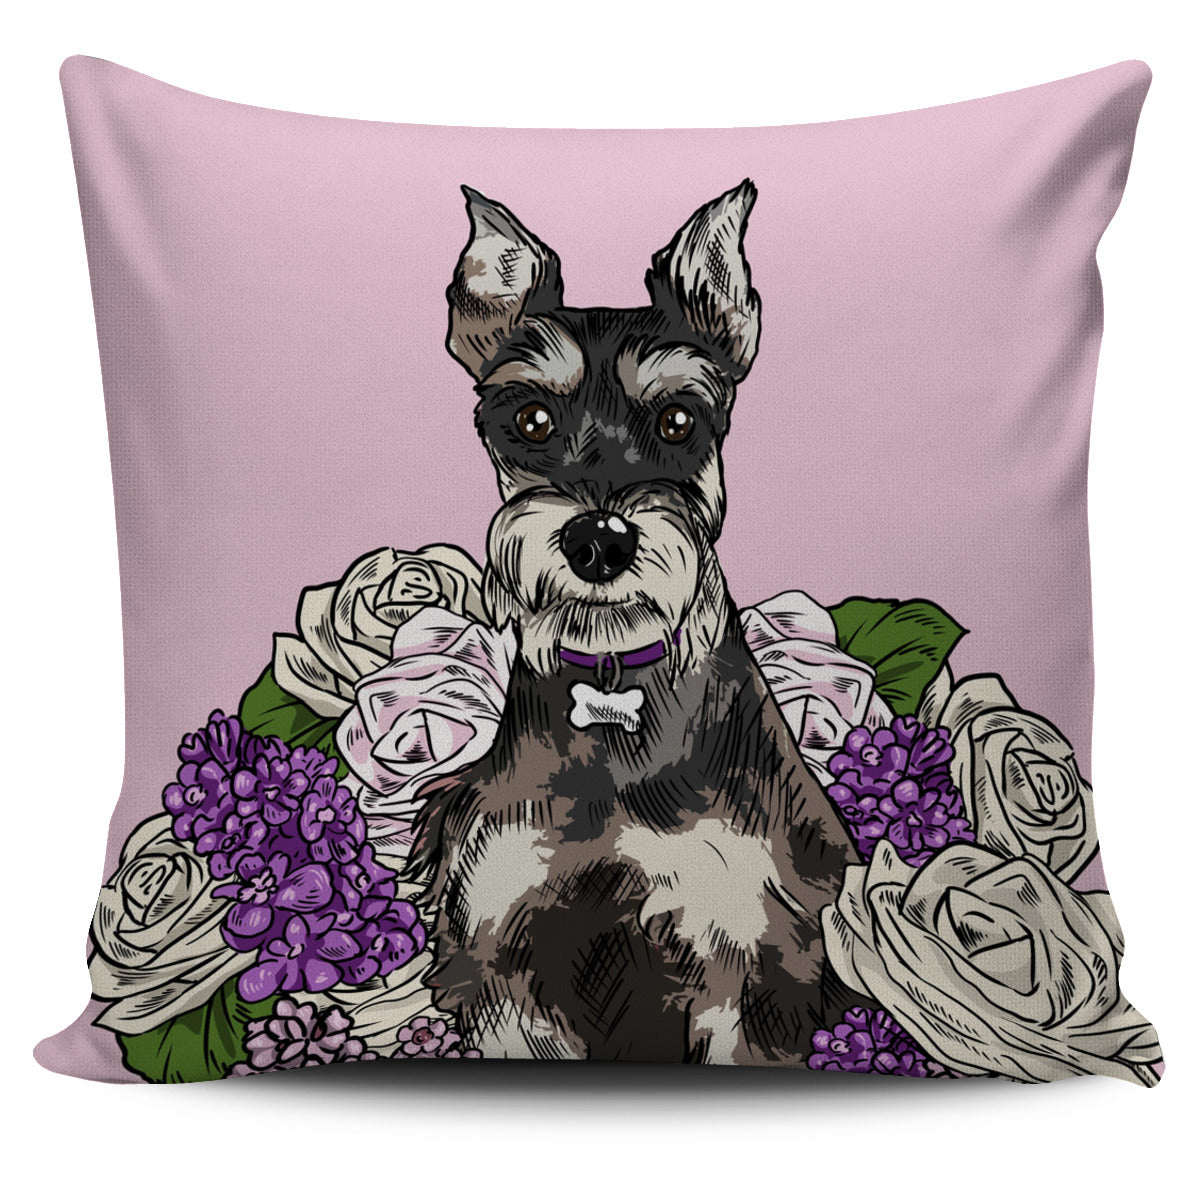 Illustrated Schnauzer Pillow Cover